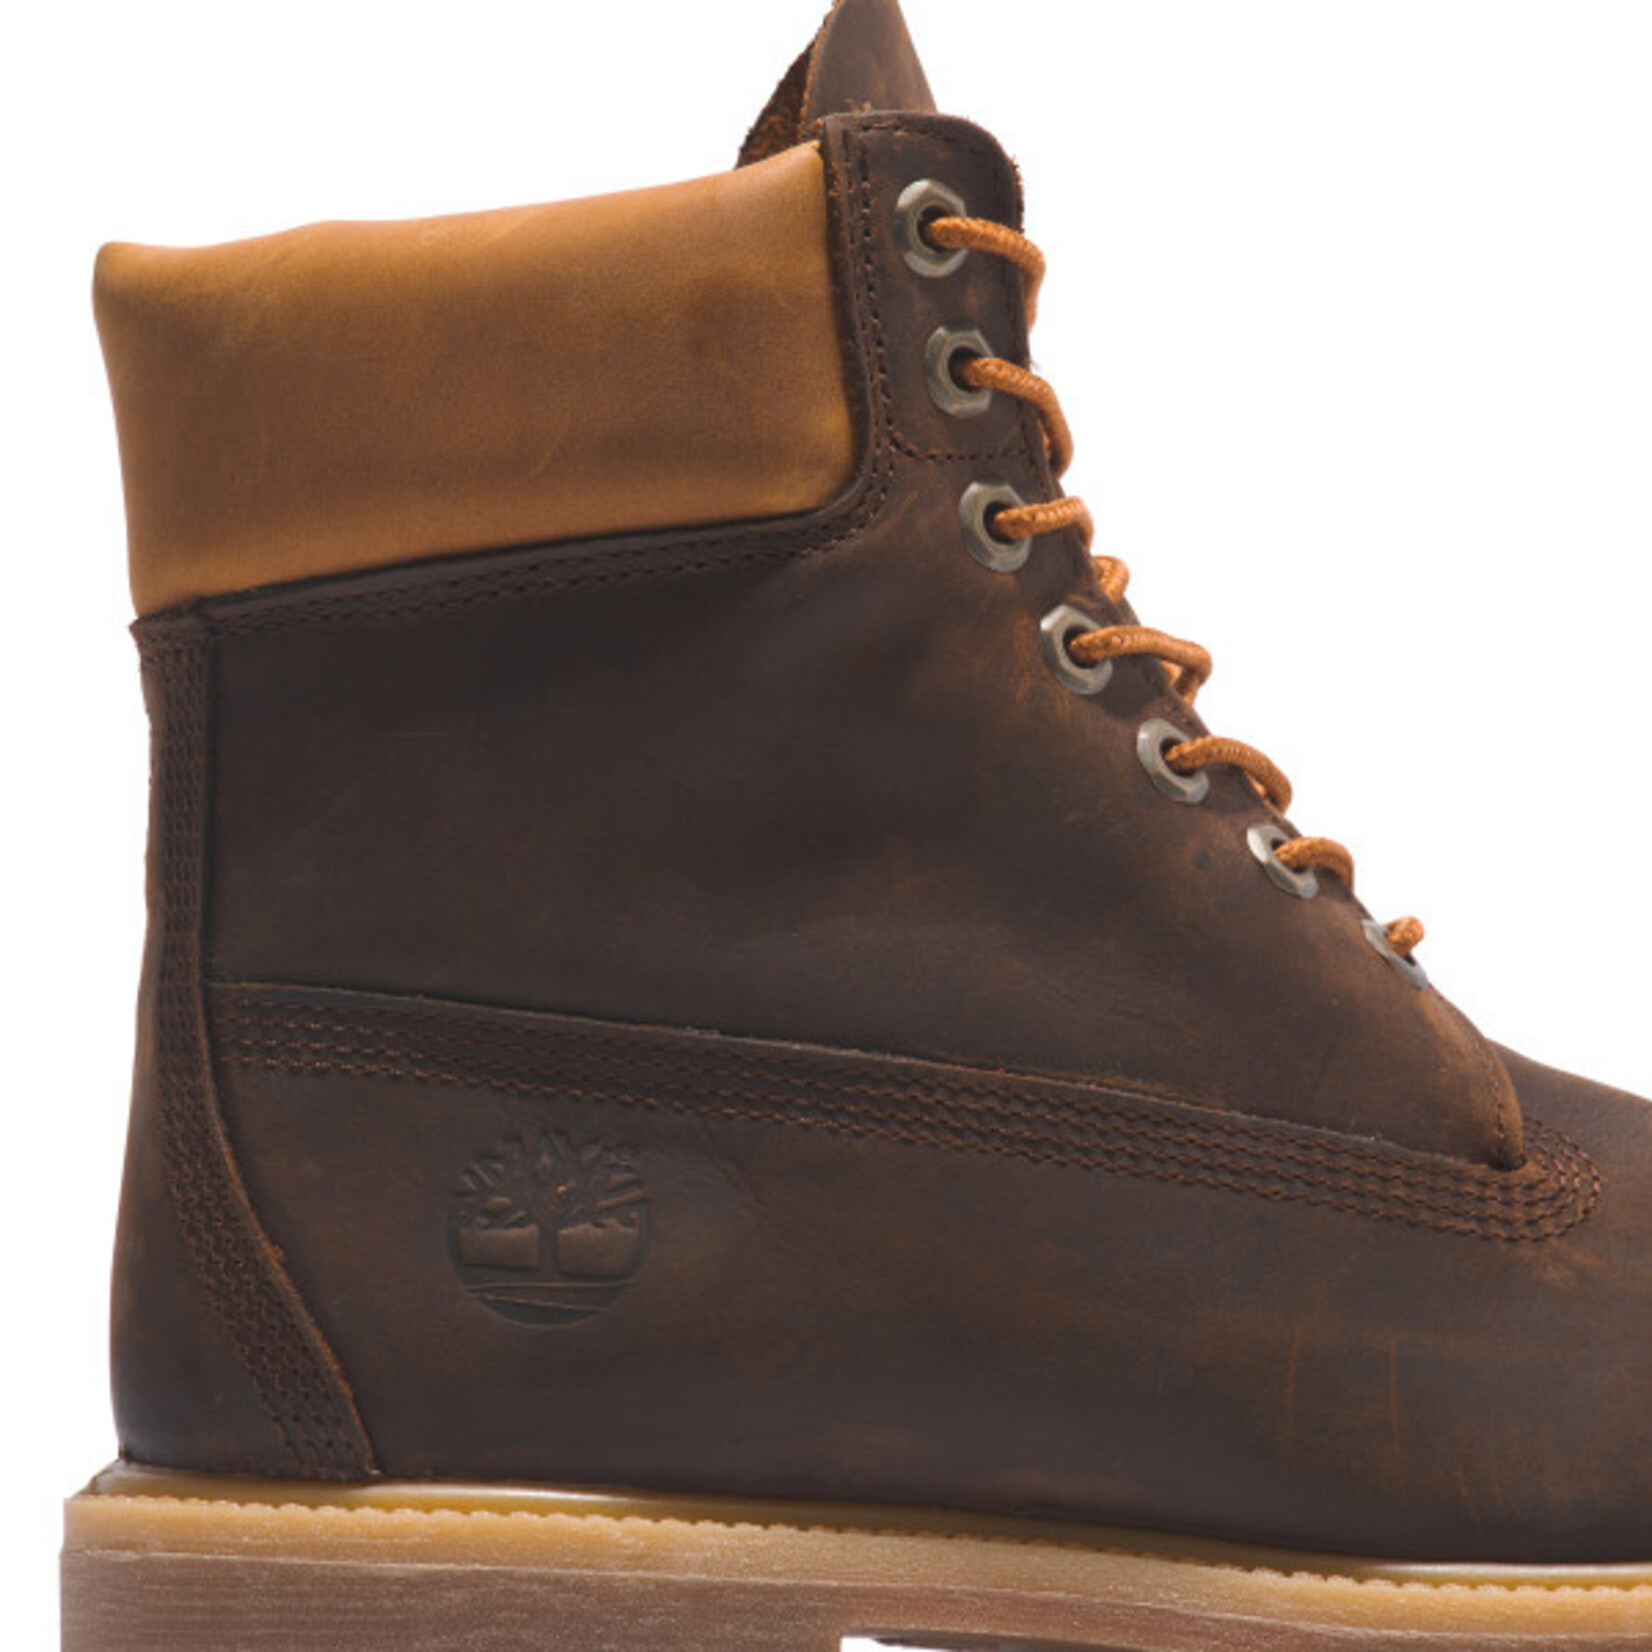 Timberland TIMBERLAND TB0A628D943 Premium 6 IN BT WP Boot